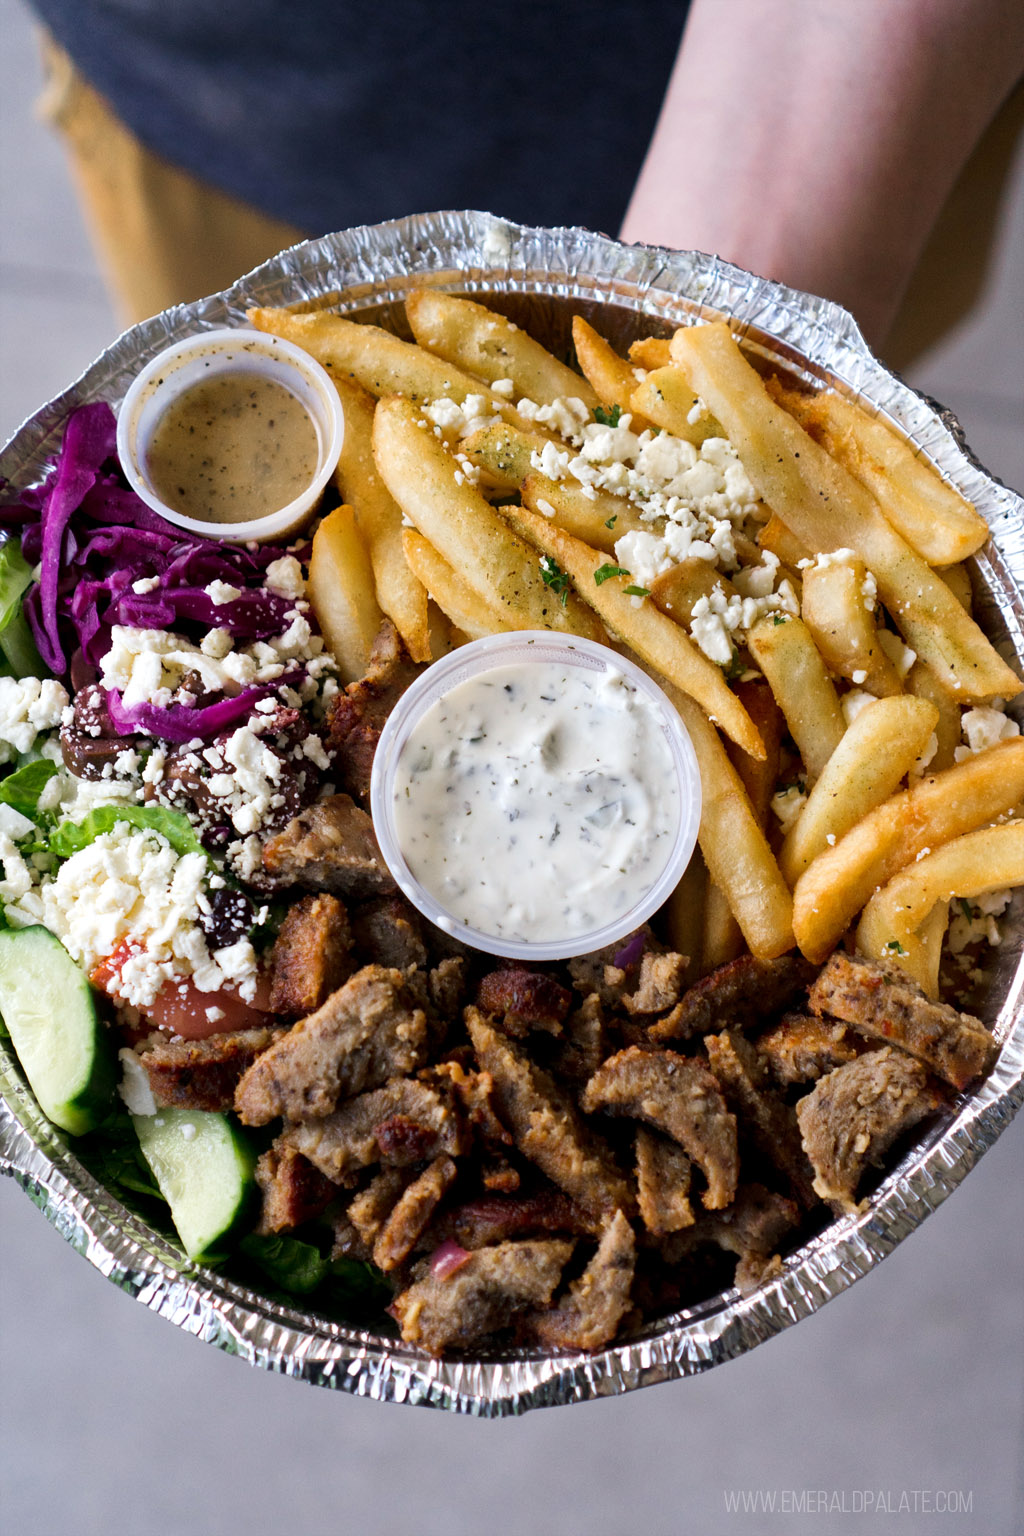 takeout container of Mediterranean food in Seattle: gyro meat, Greek fries, and salad.